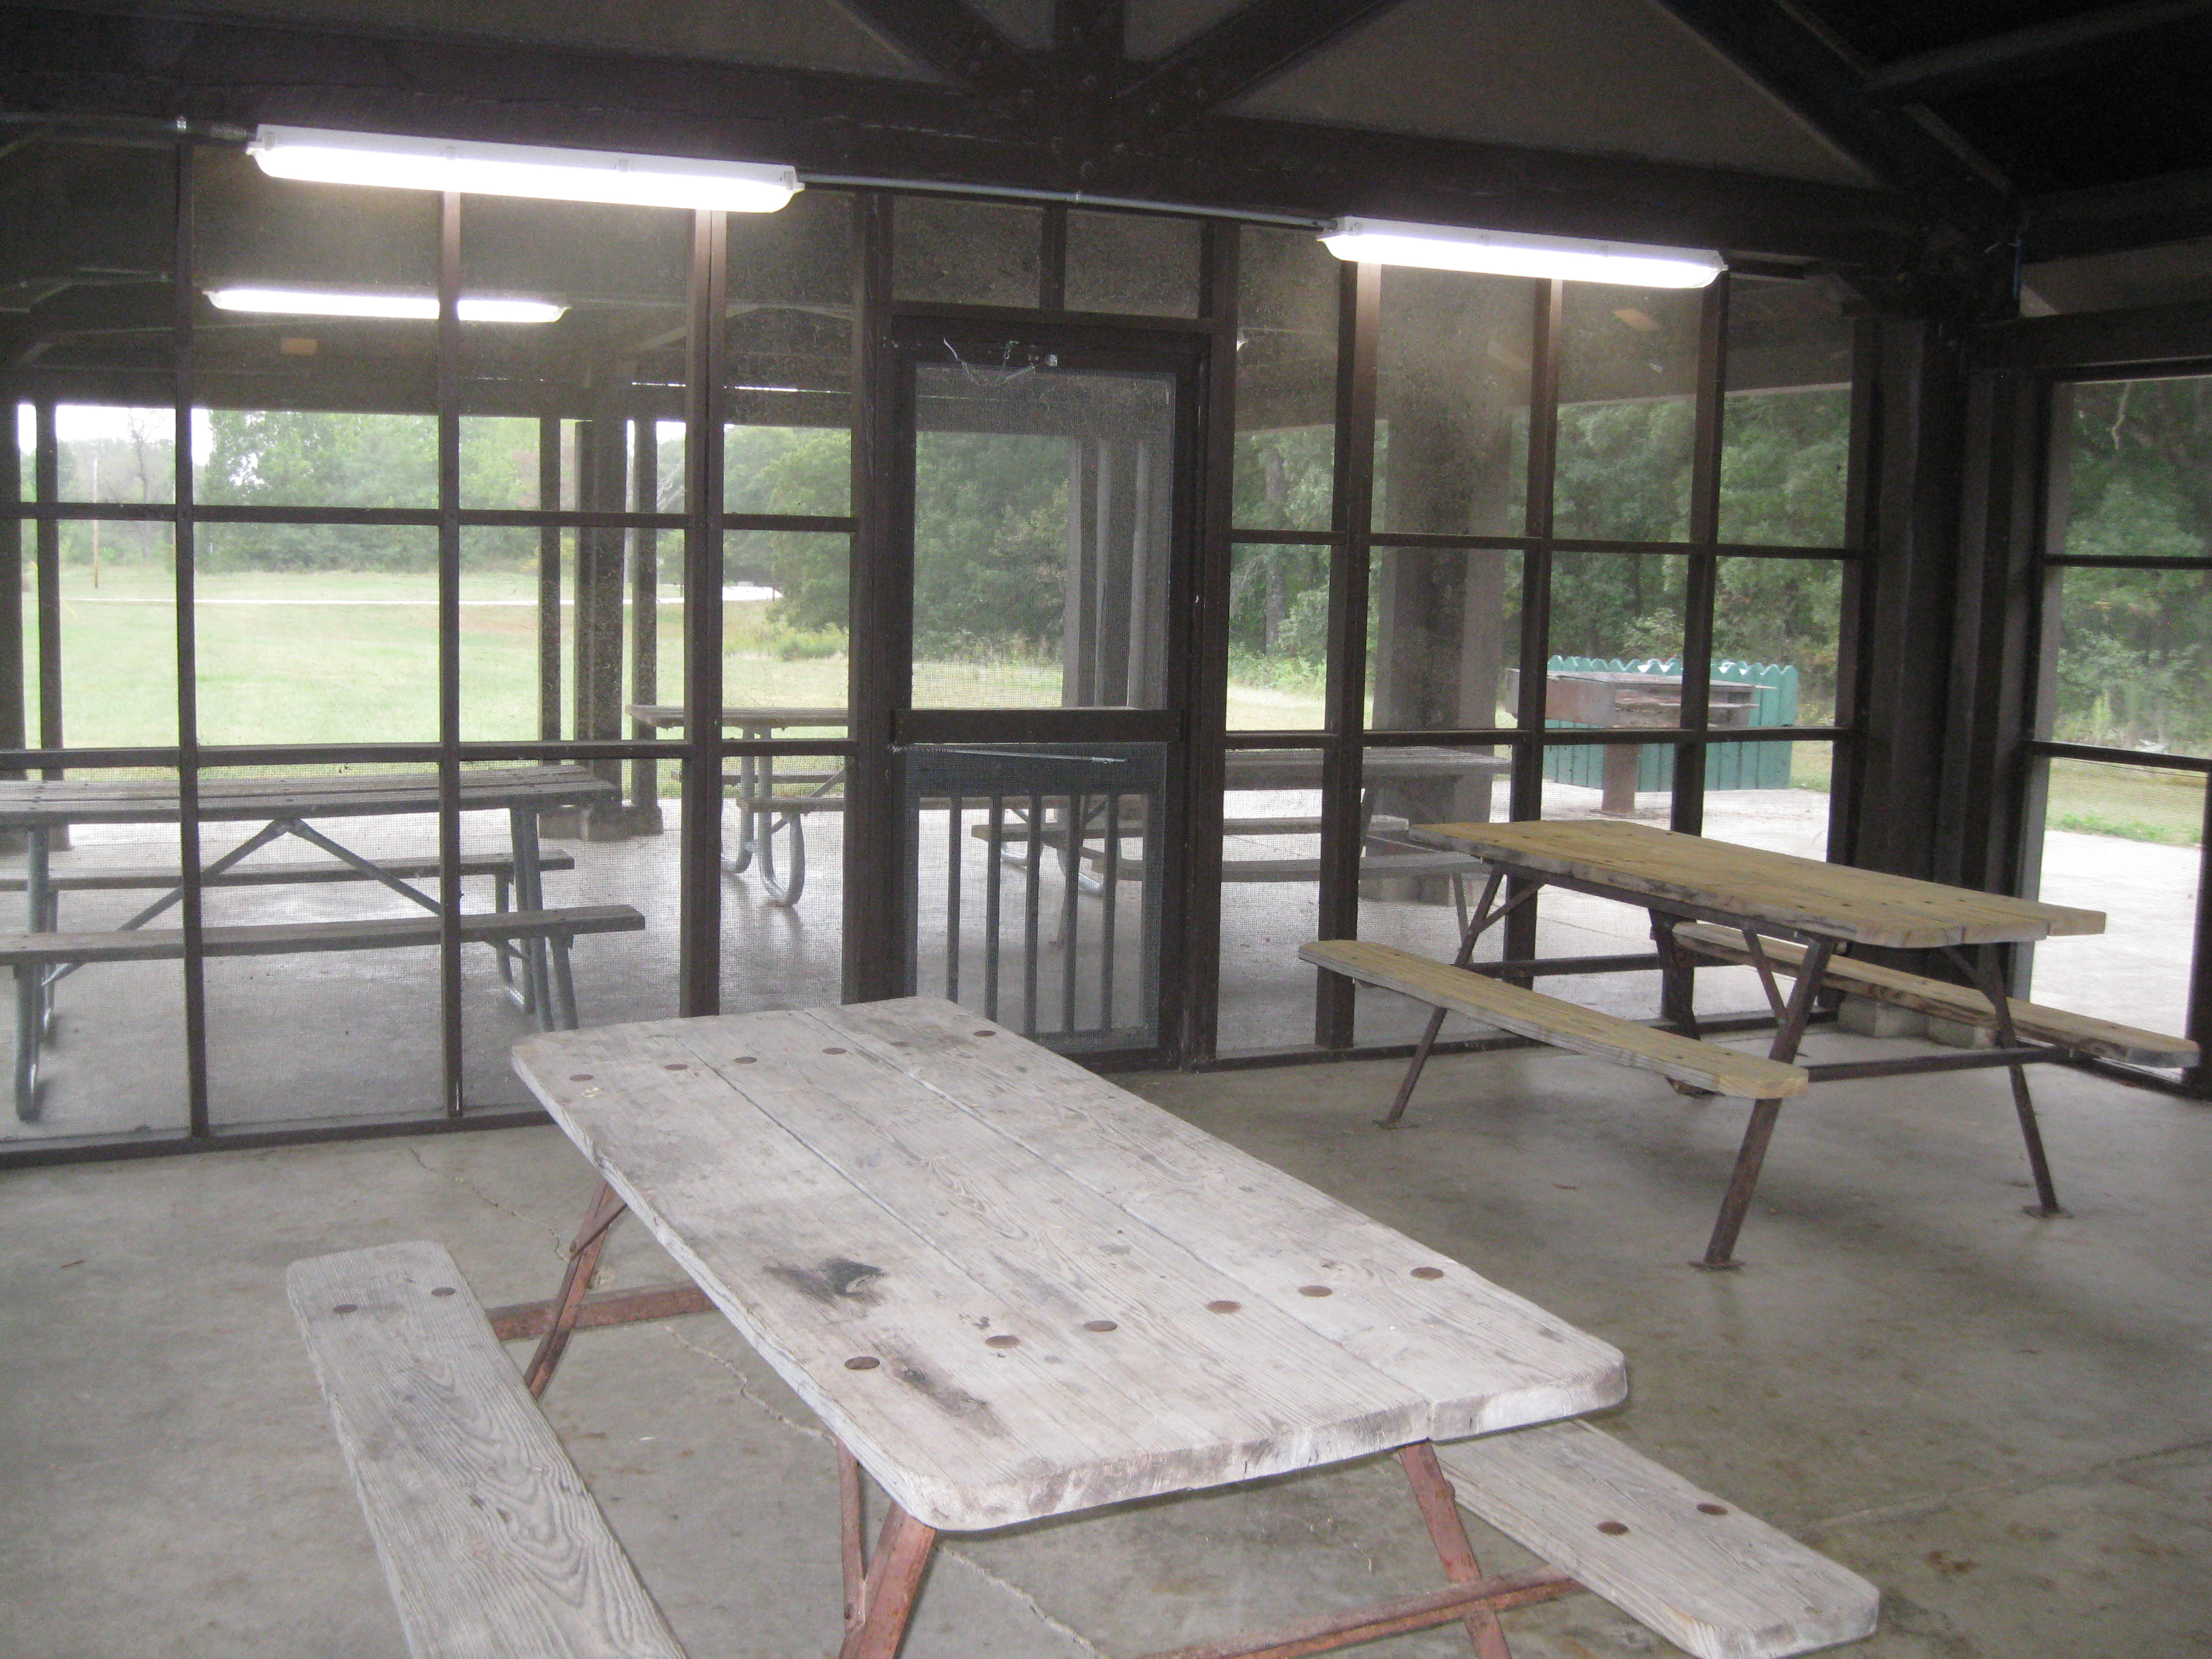 Picnic tables inside the open shelter